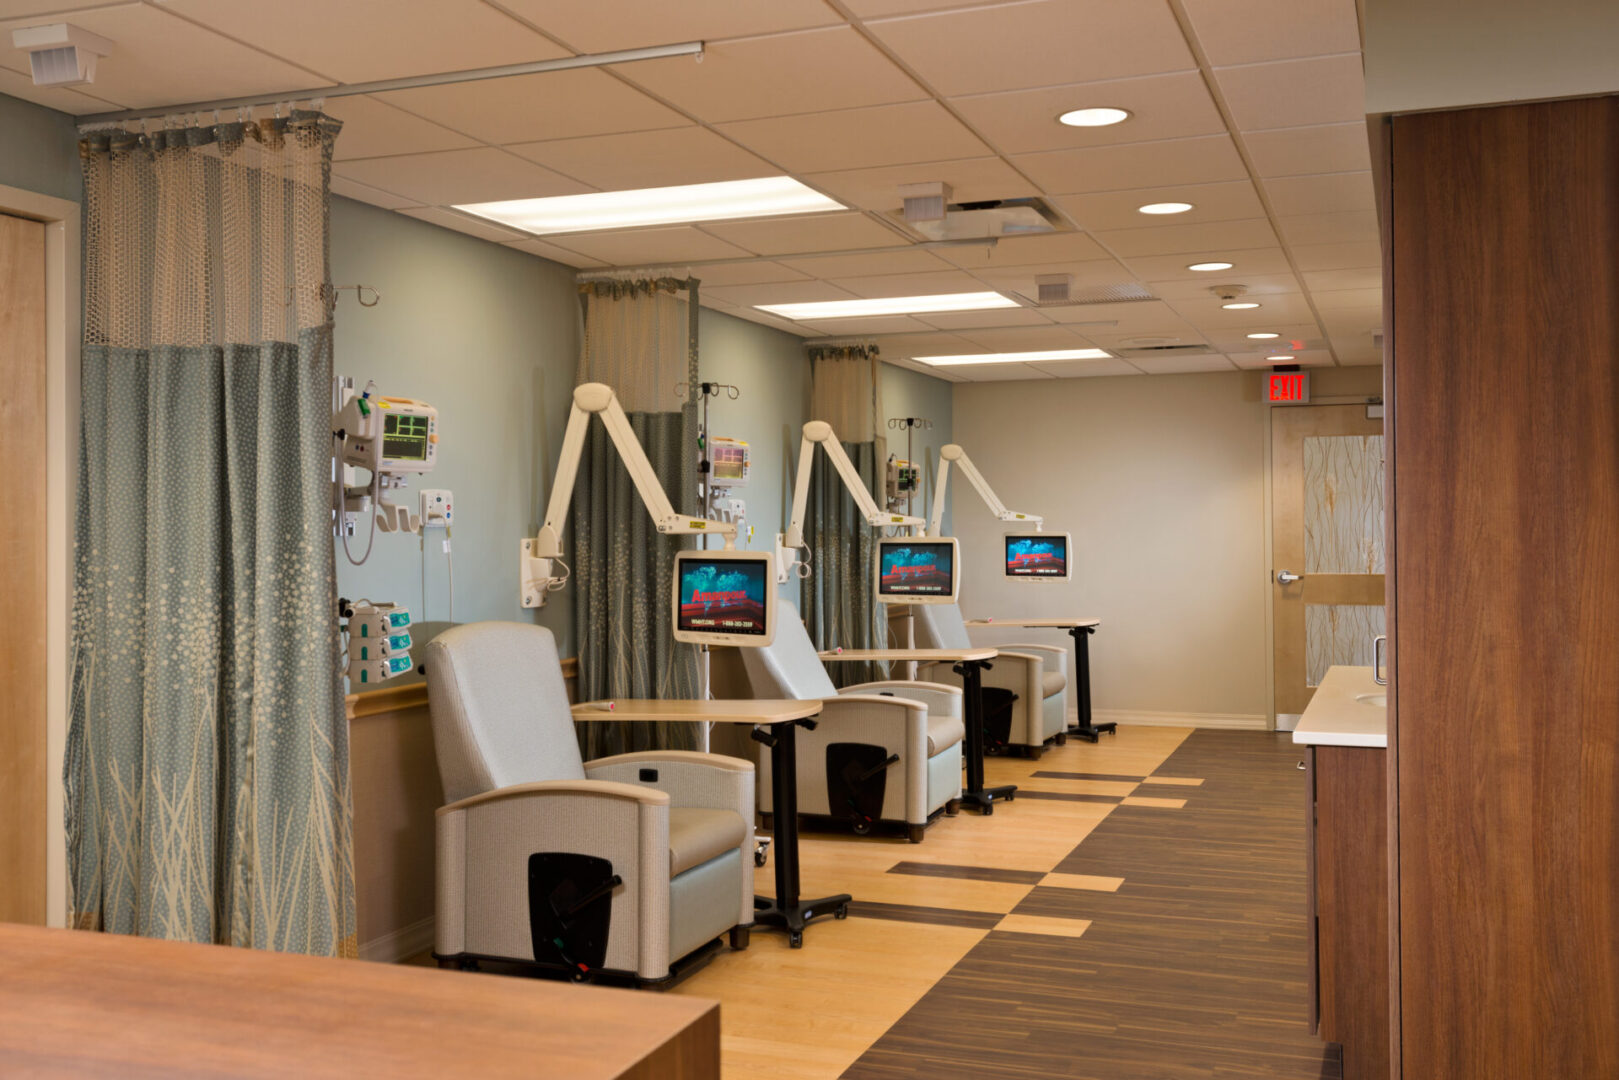 A hospital room with chairs and monitors on the wall.